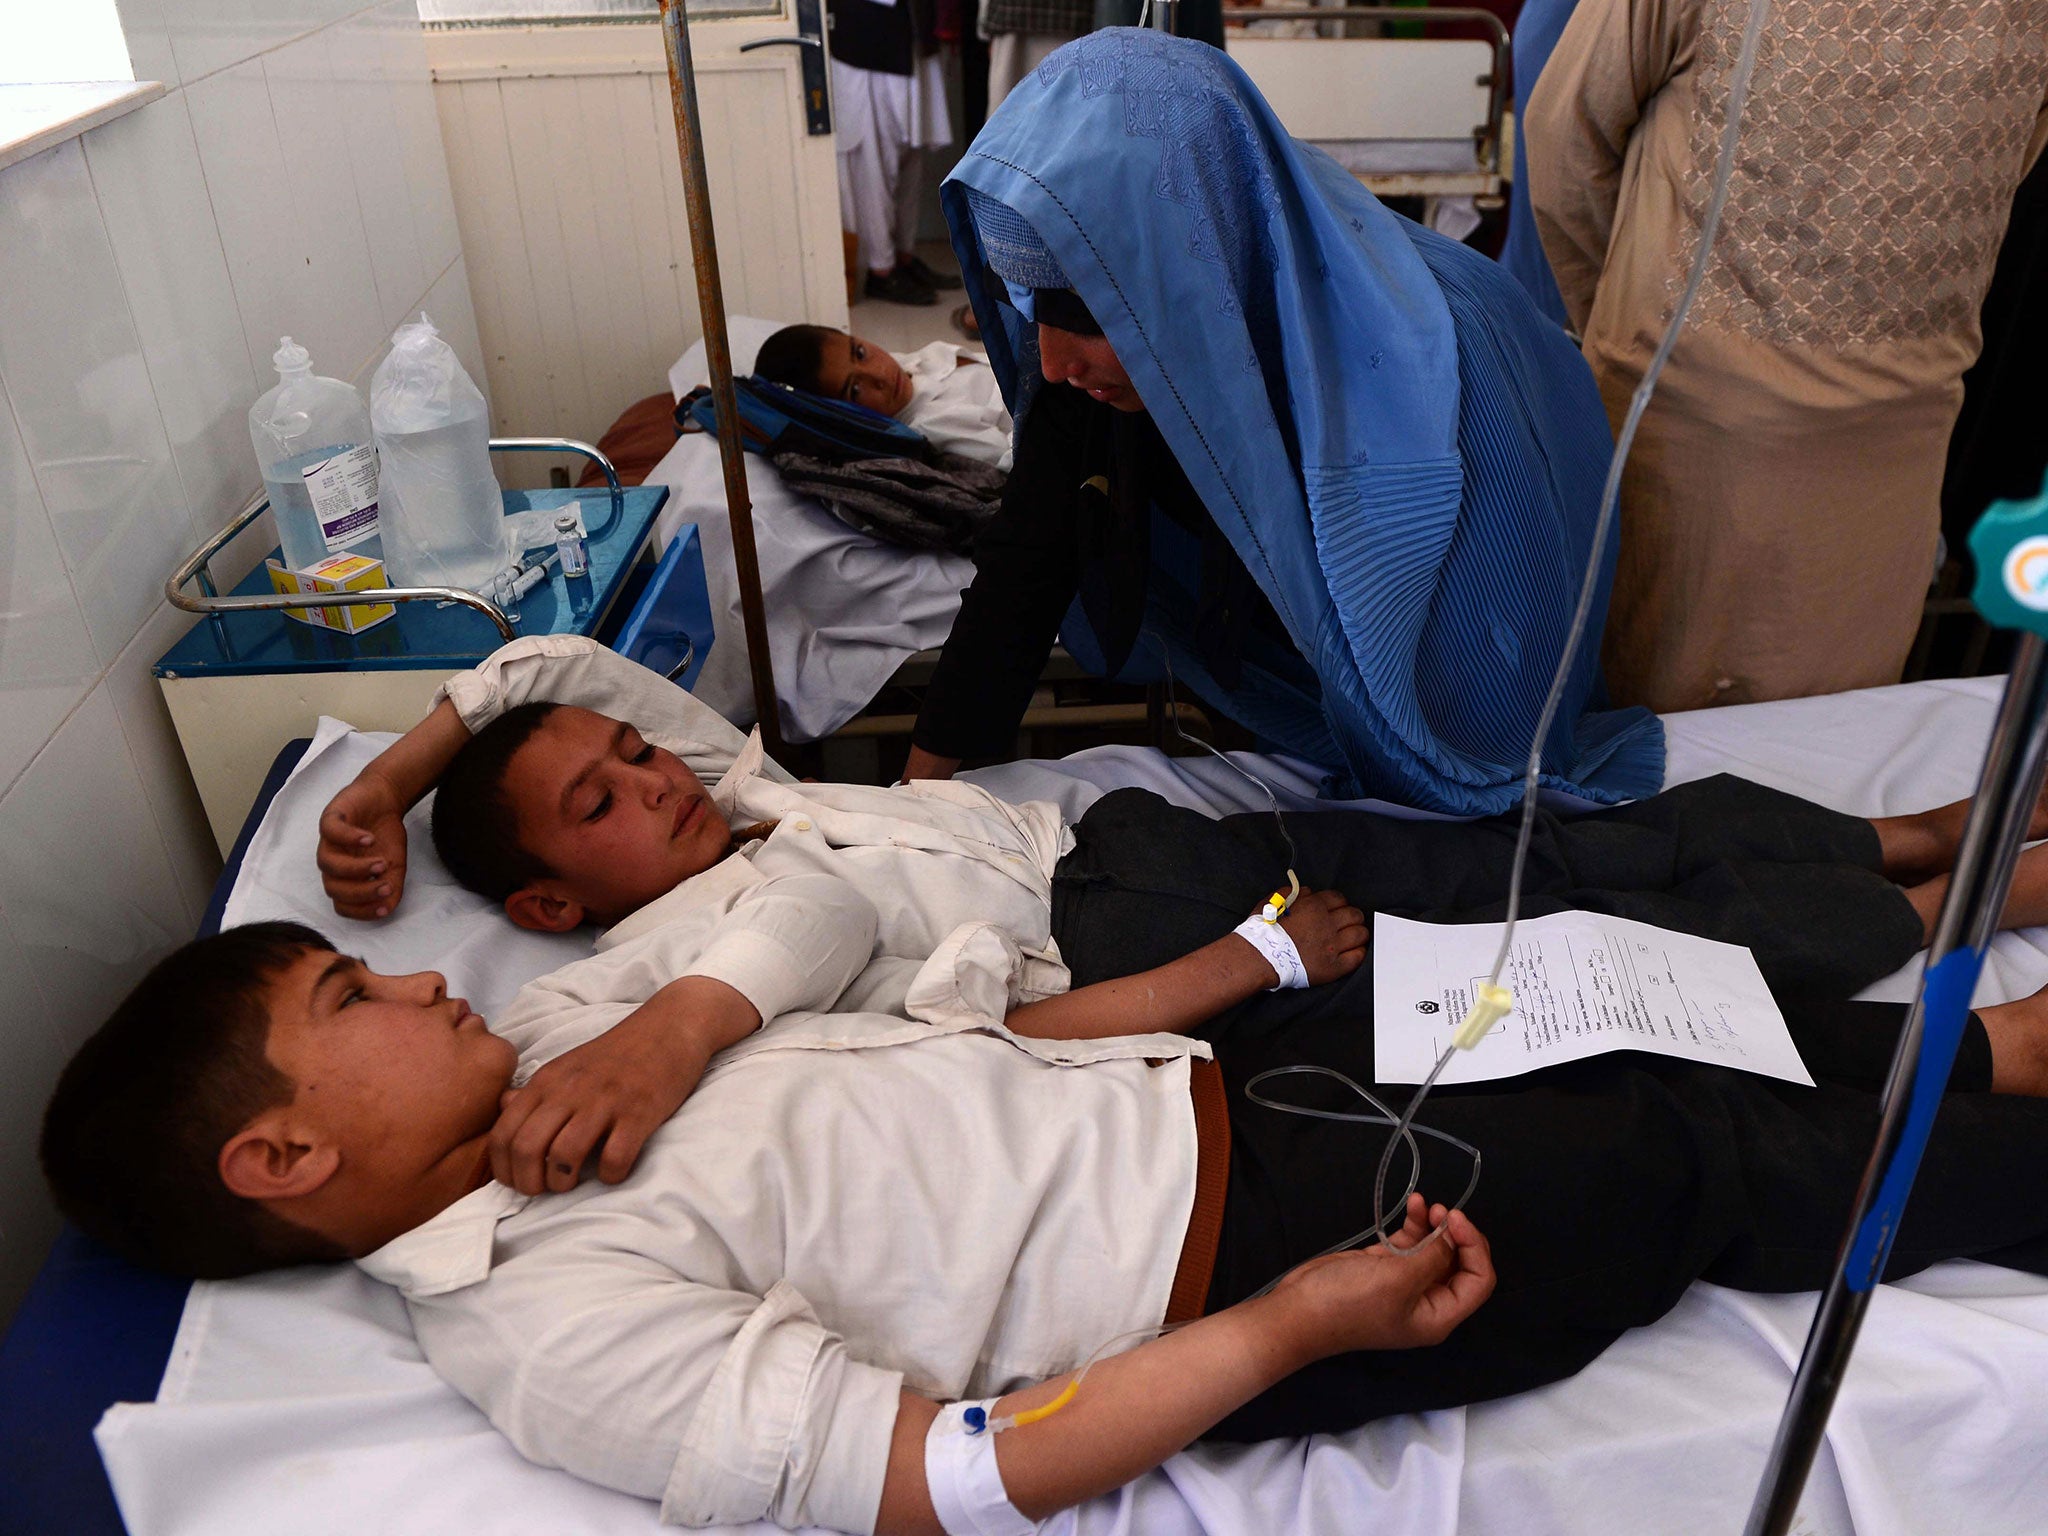 Schoolchildren lie in bed as they are treated for poisoning at Afghan hospital